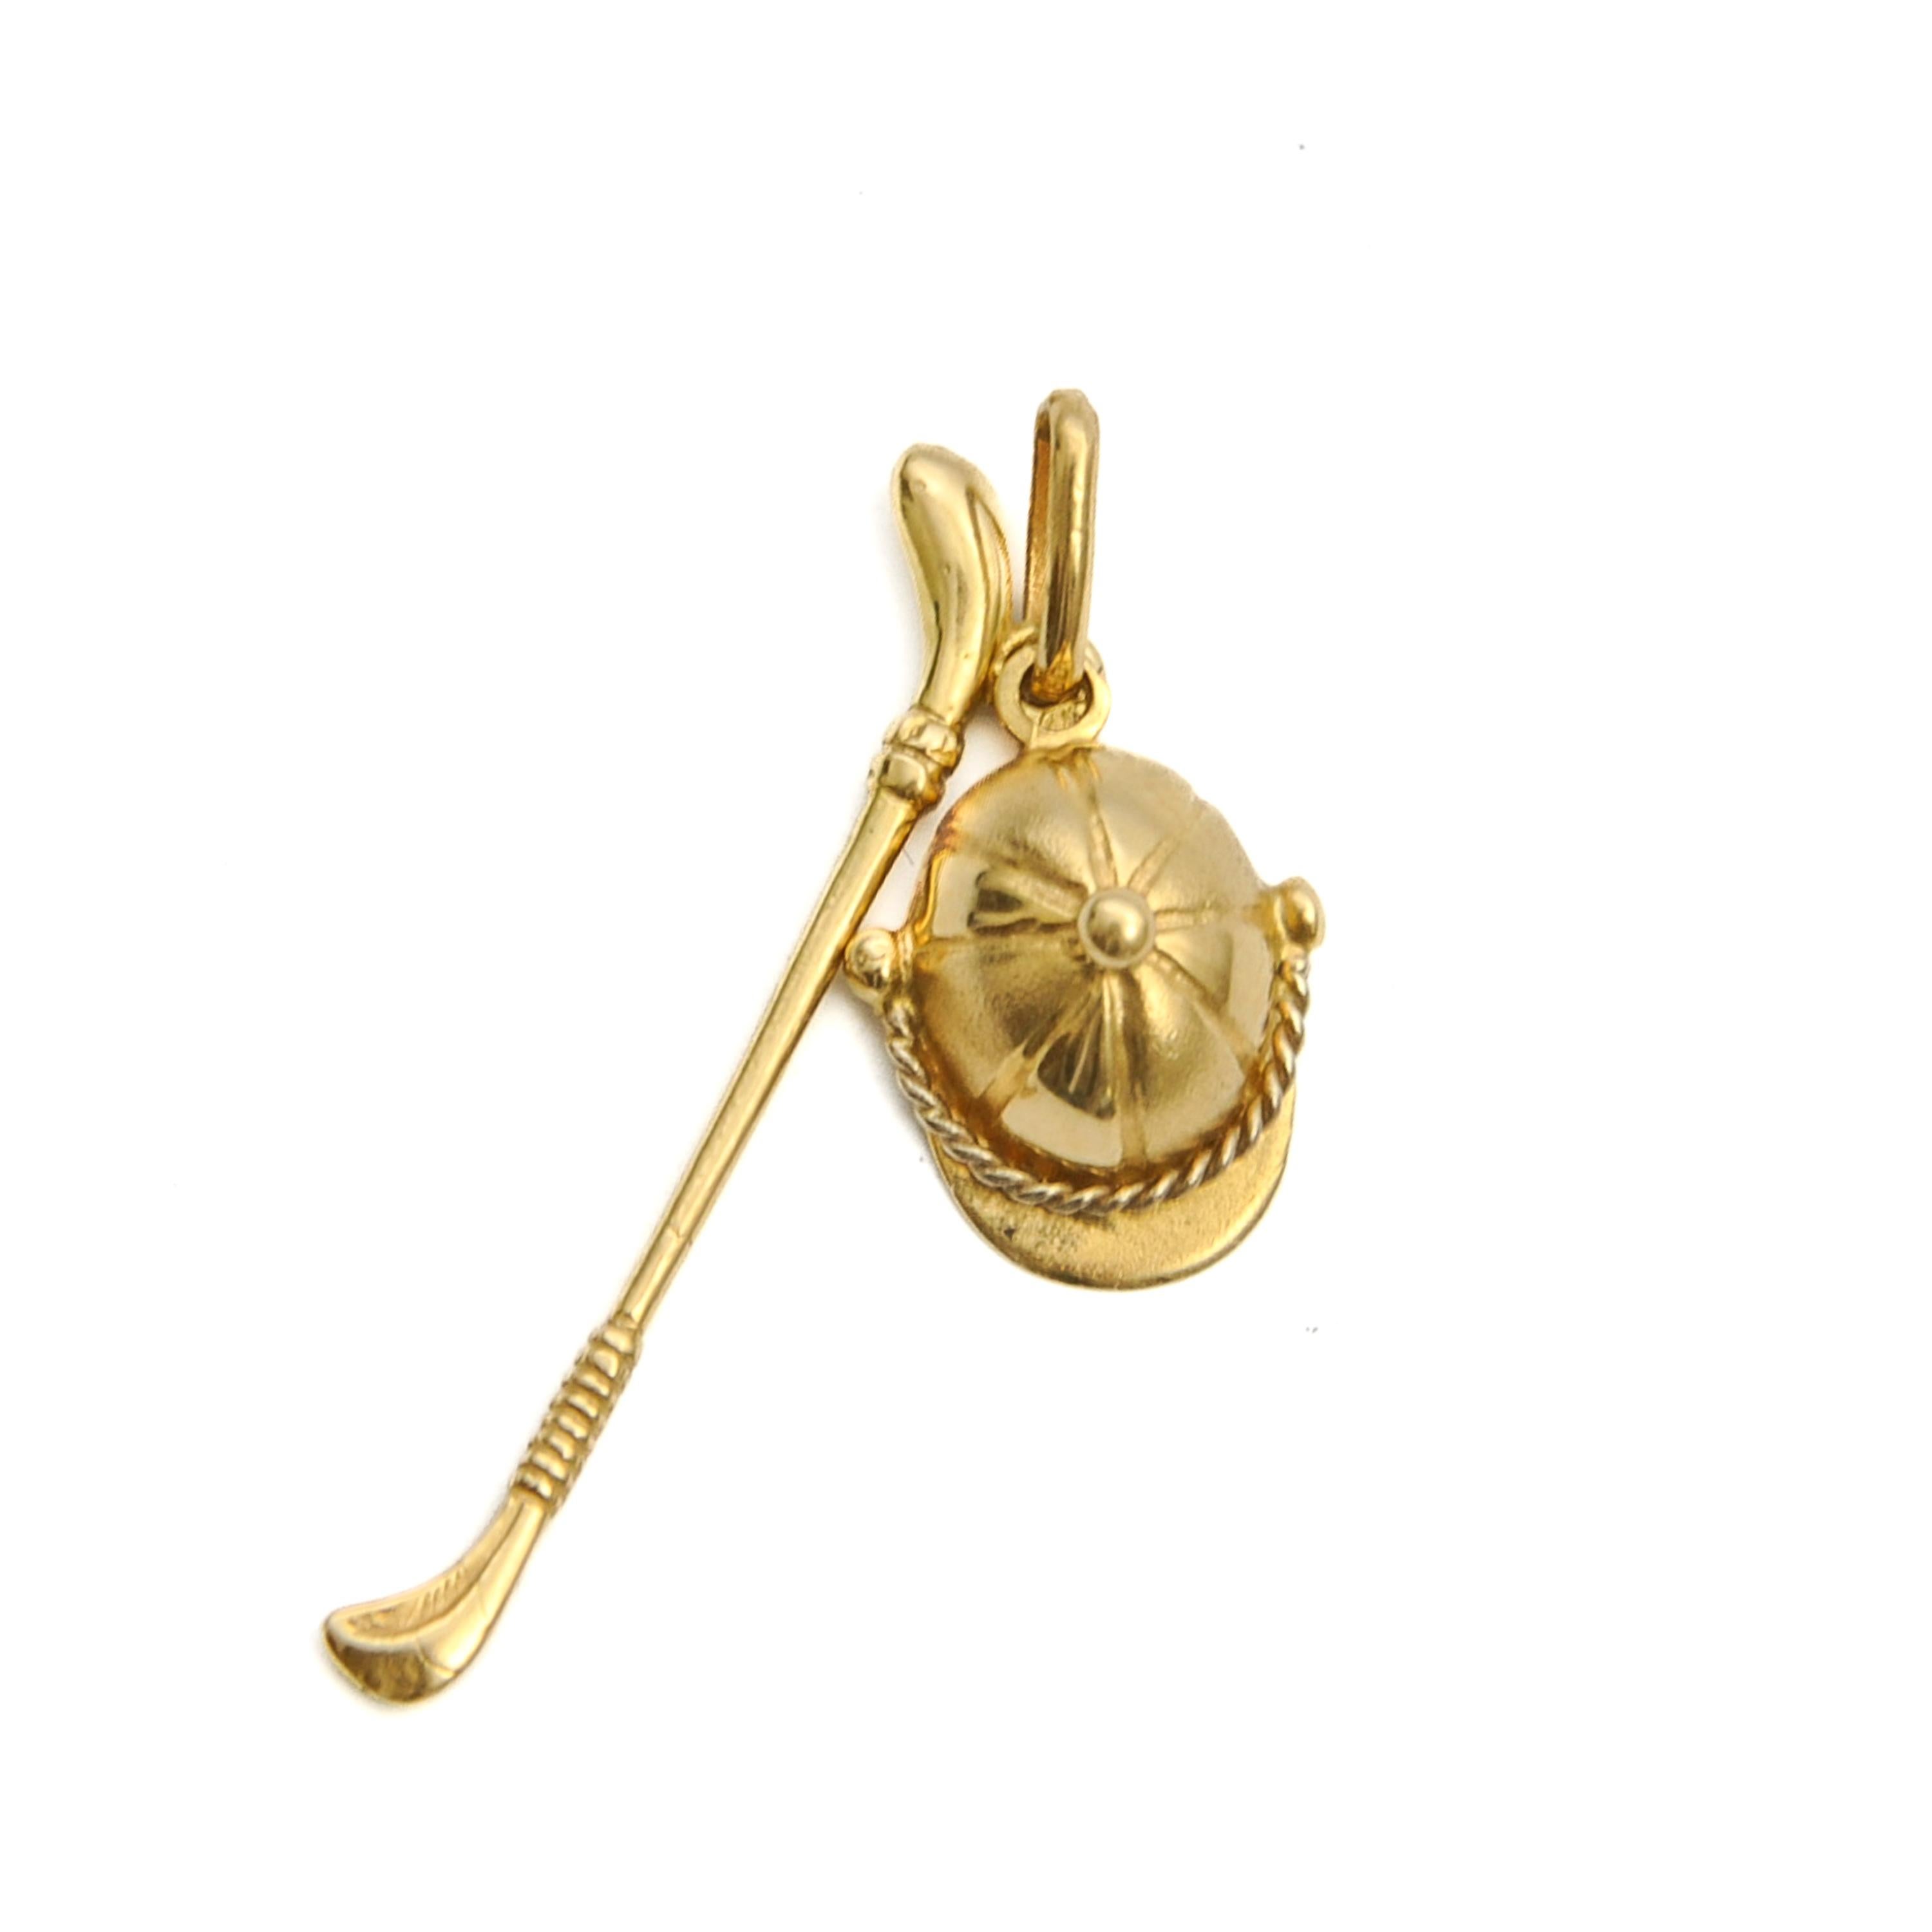 Vintage 18K Gold Polo Riding Helmet and Polo Stick Charm Pendant For Sale 1